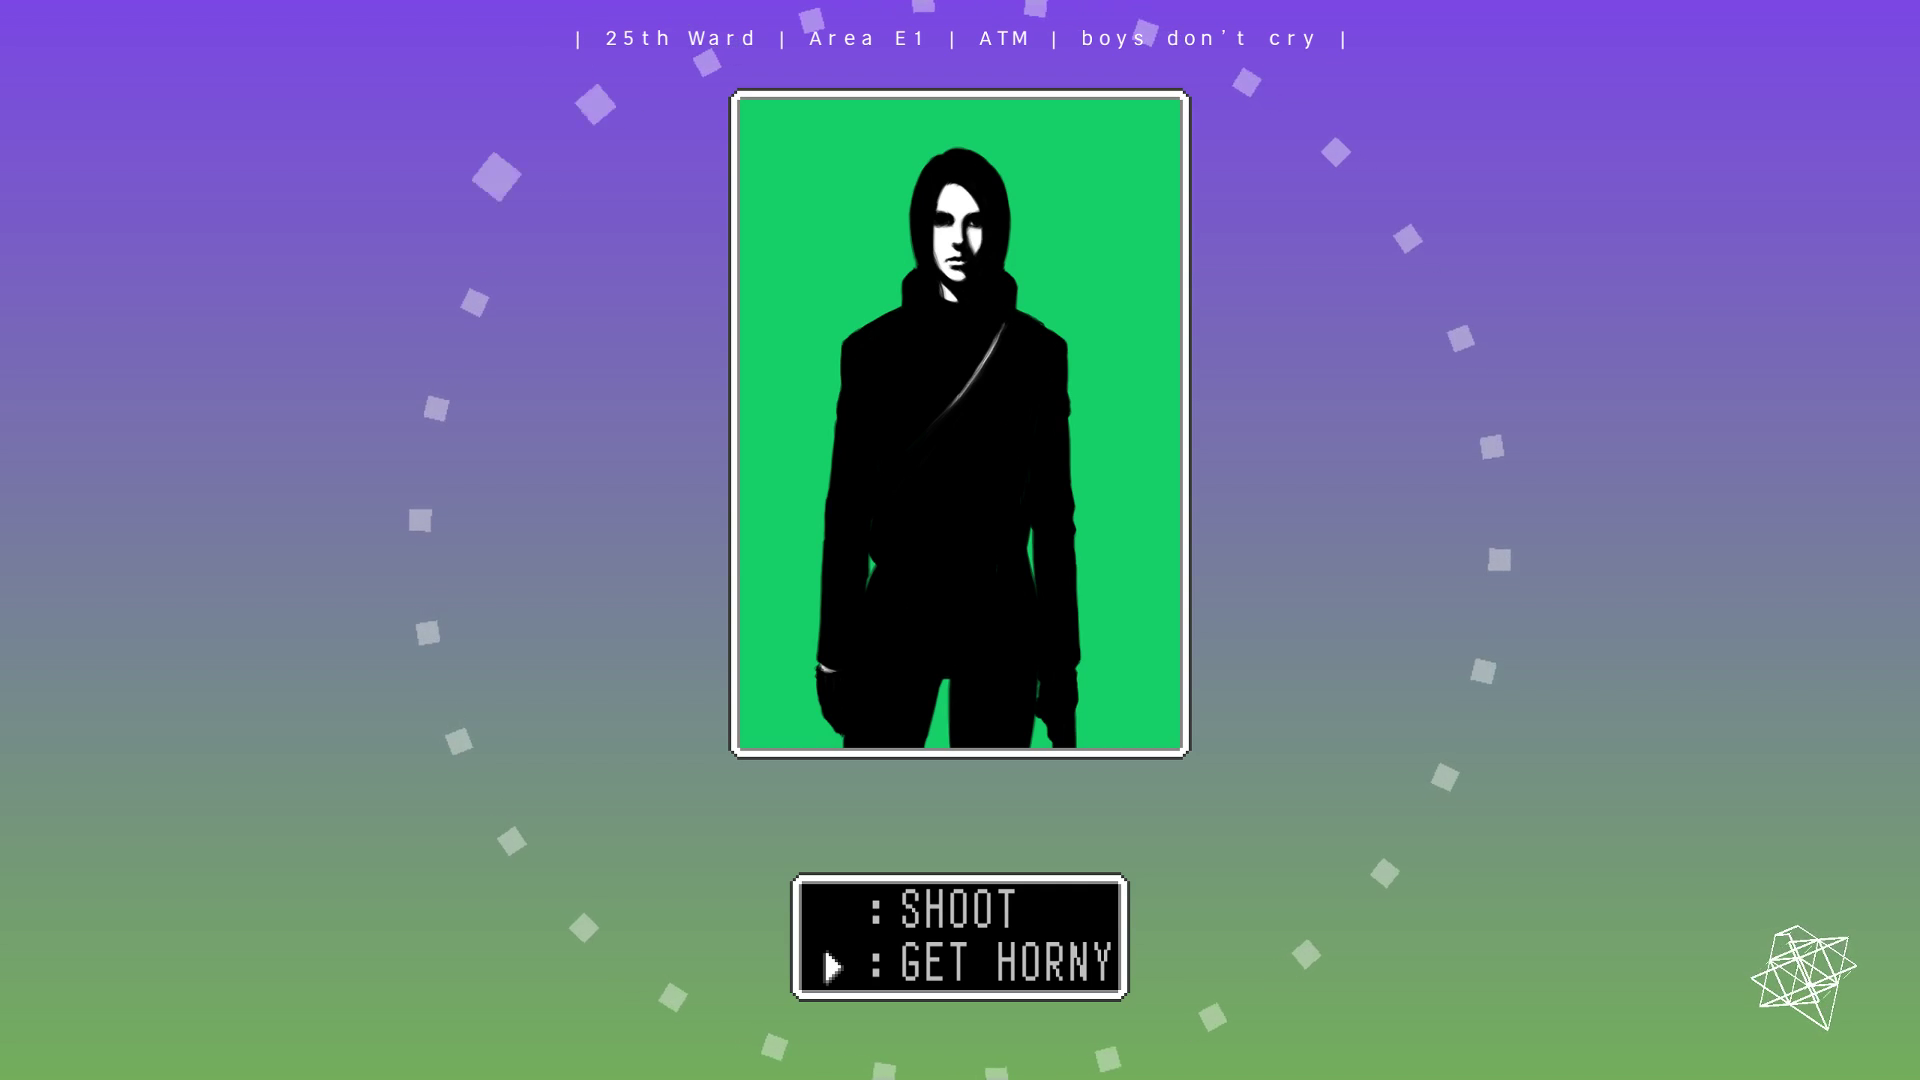 Screenshot from "boys don't cry." A single window shows a shadowy woman holding a gun. The text window has two options: "SHOOT" and "GET HORNY."